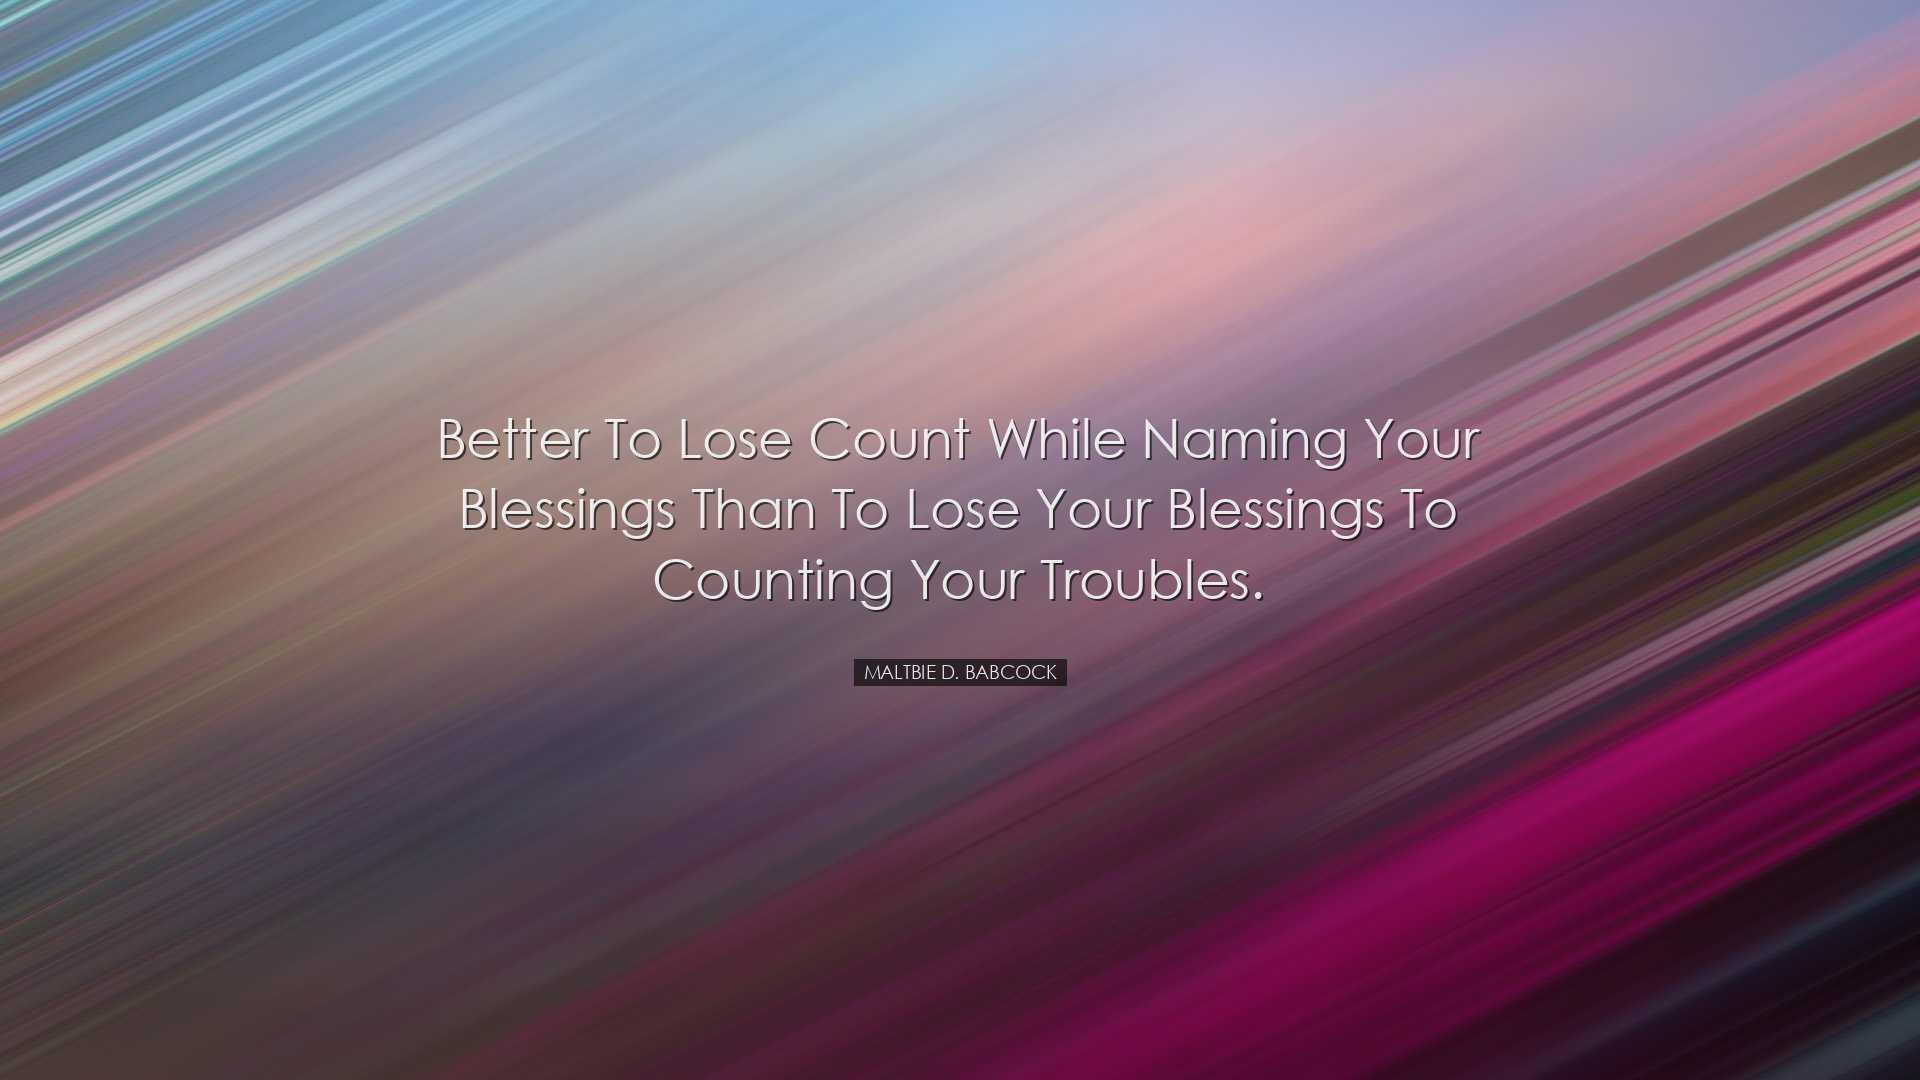 Better to lose count while naming your blessings than to lose your